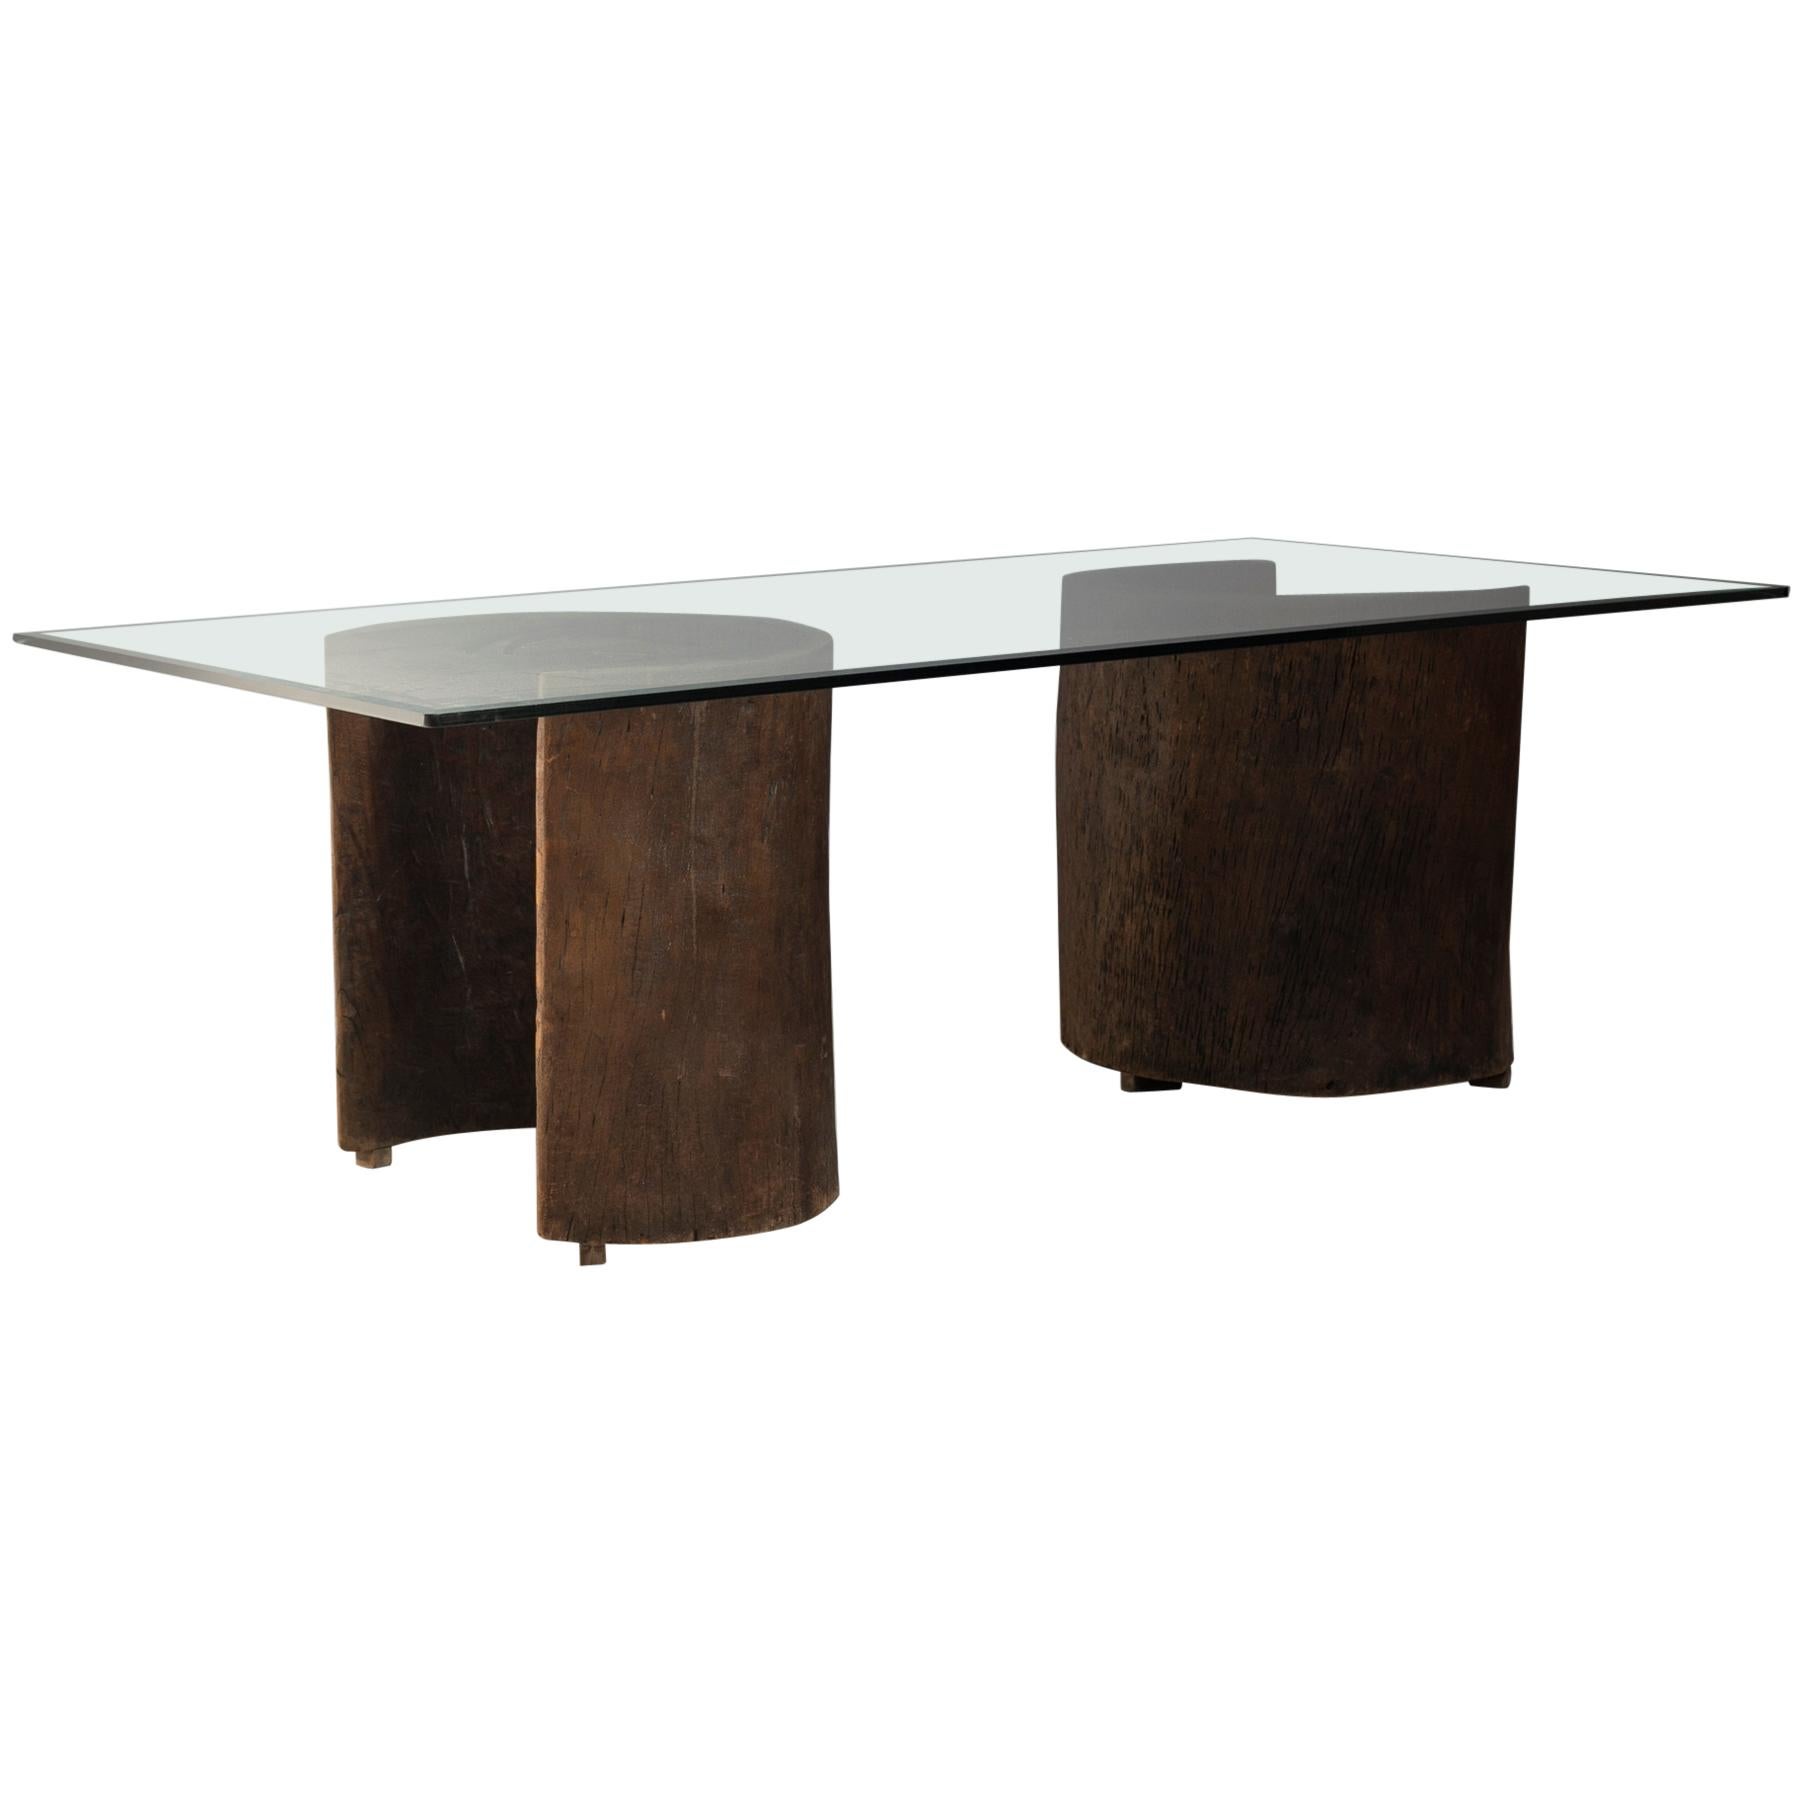 José Zanine Caldas Dining Table, Glass and Brazilian Solid Hard Wood, 1970s For Sale